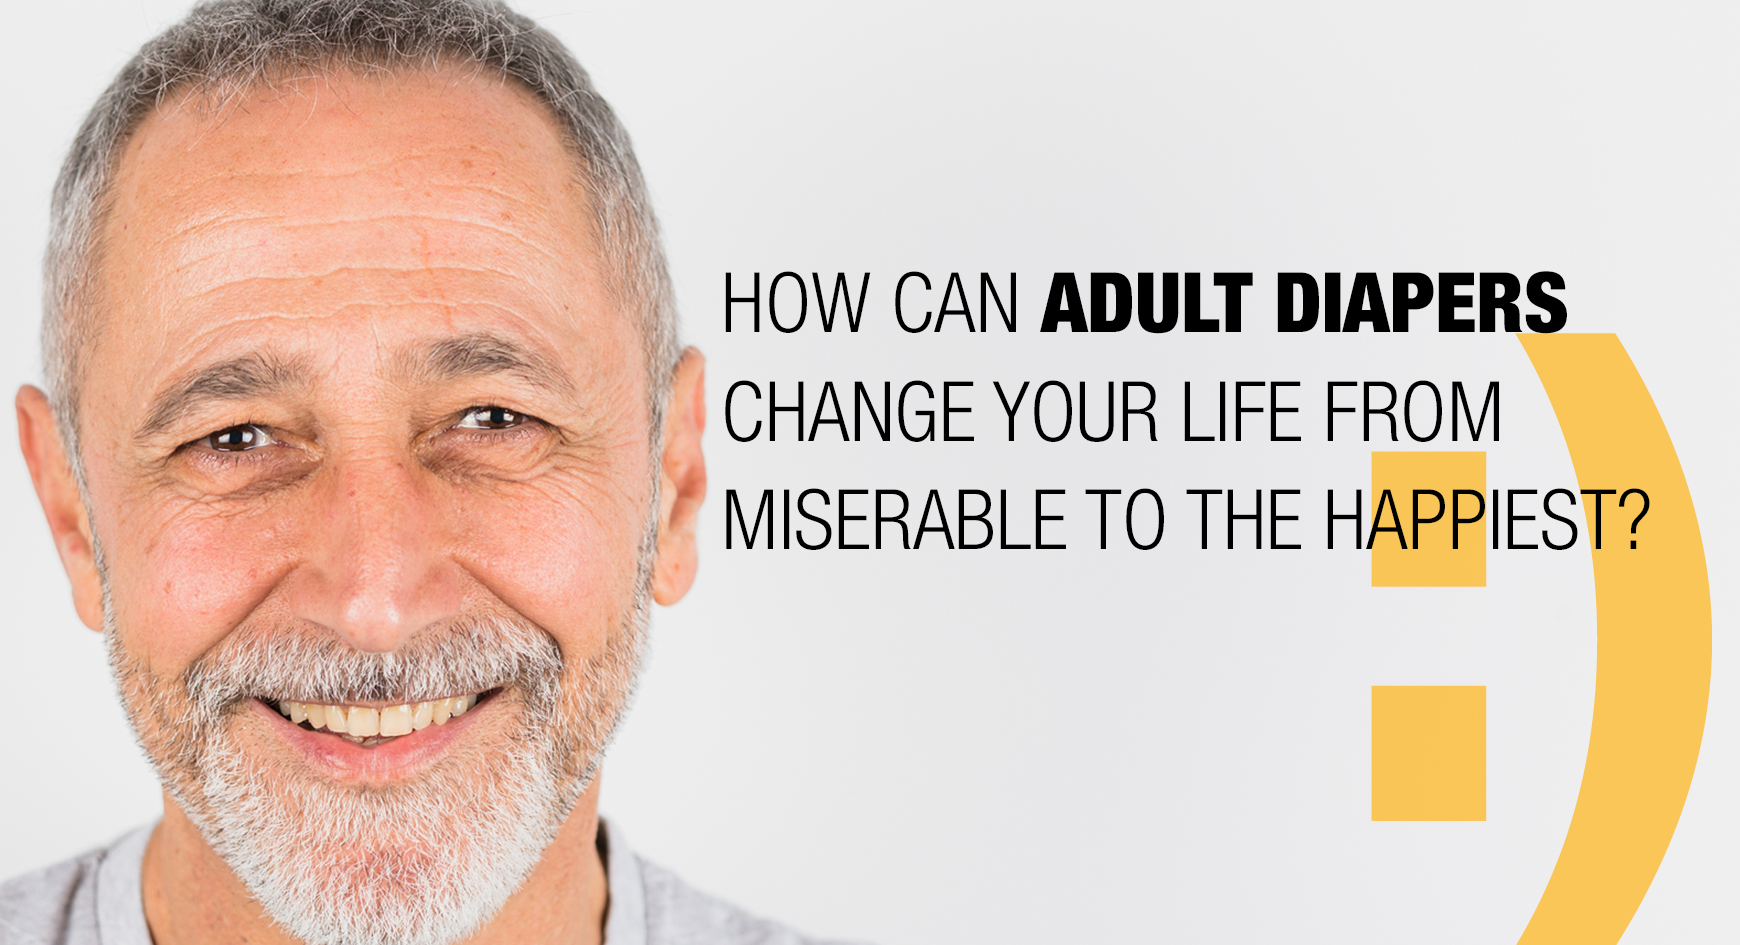 How can adult diapers change your life from miserable to the happiest?